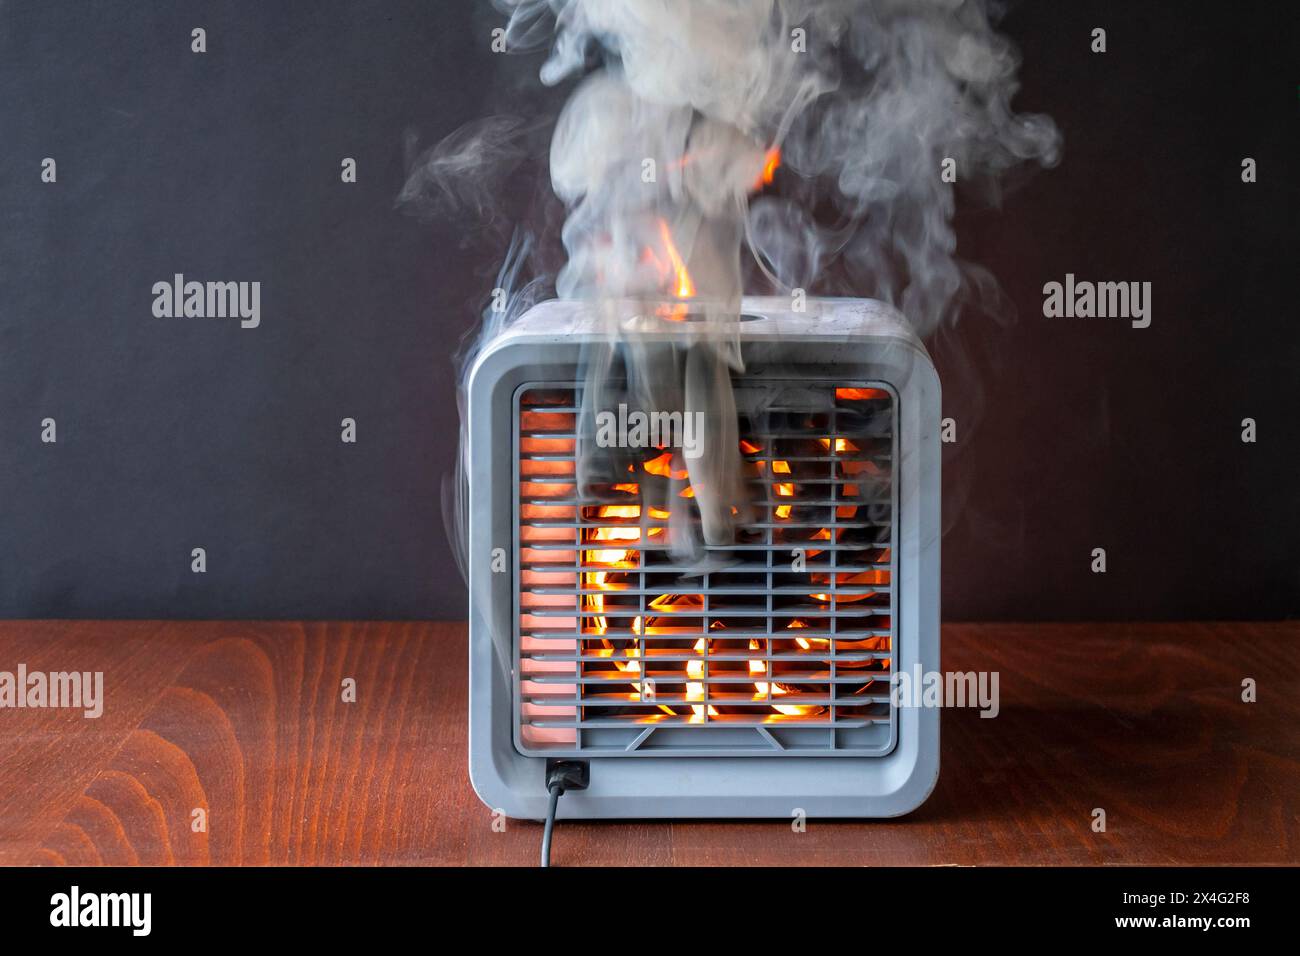 Air purifier burns with fire, flames and sparks, black smoke. The cause of the fire in the apartment, a short circuit, faulty equipment. Stock Photo